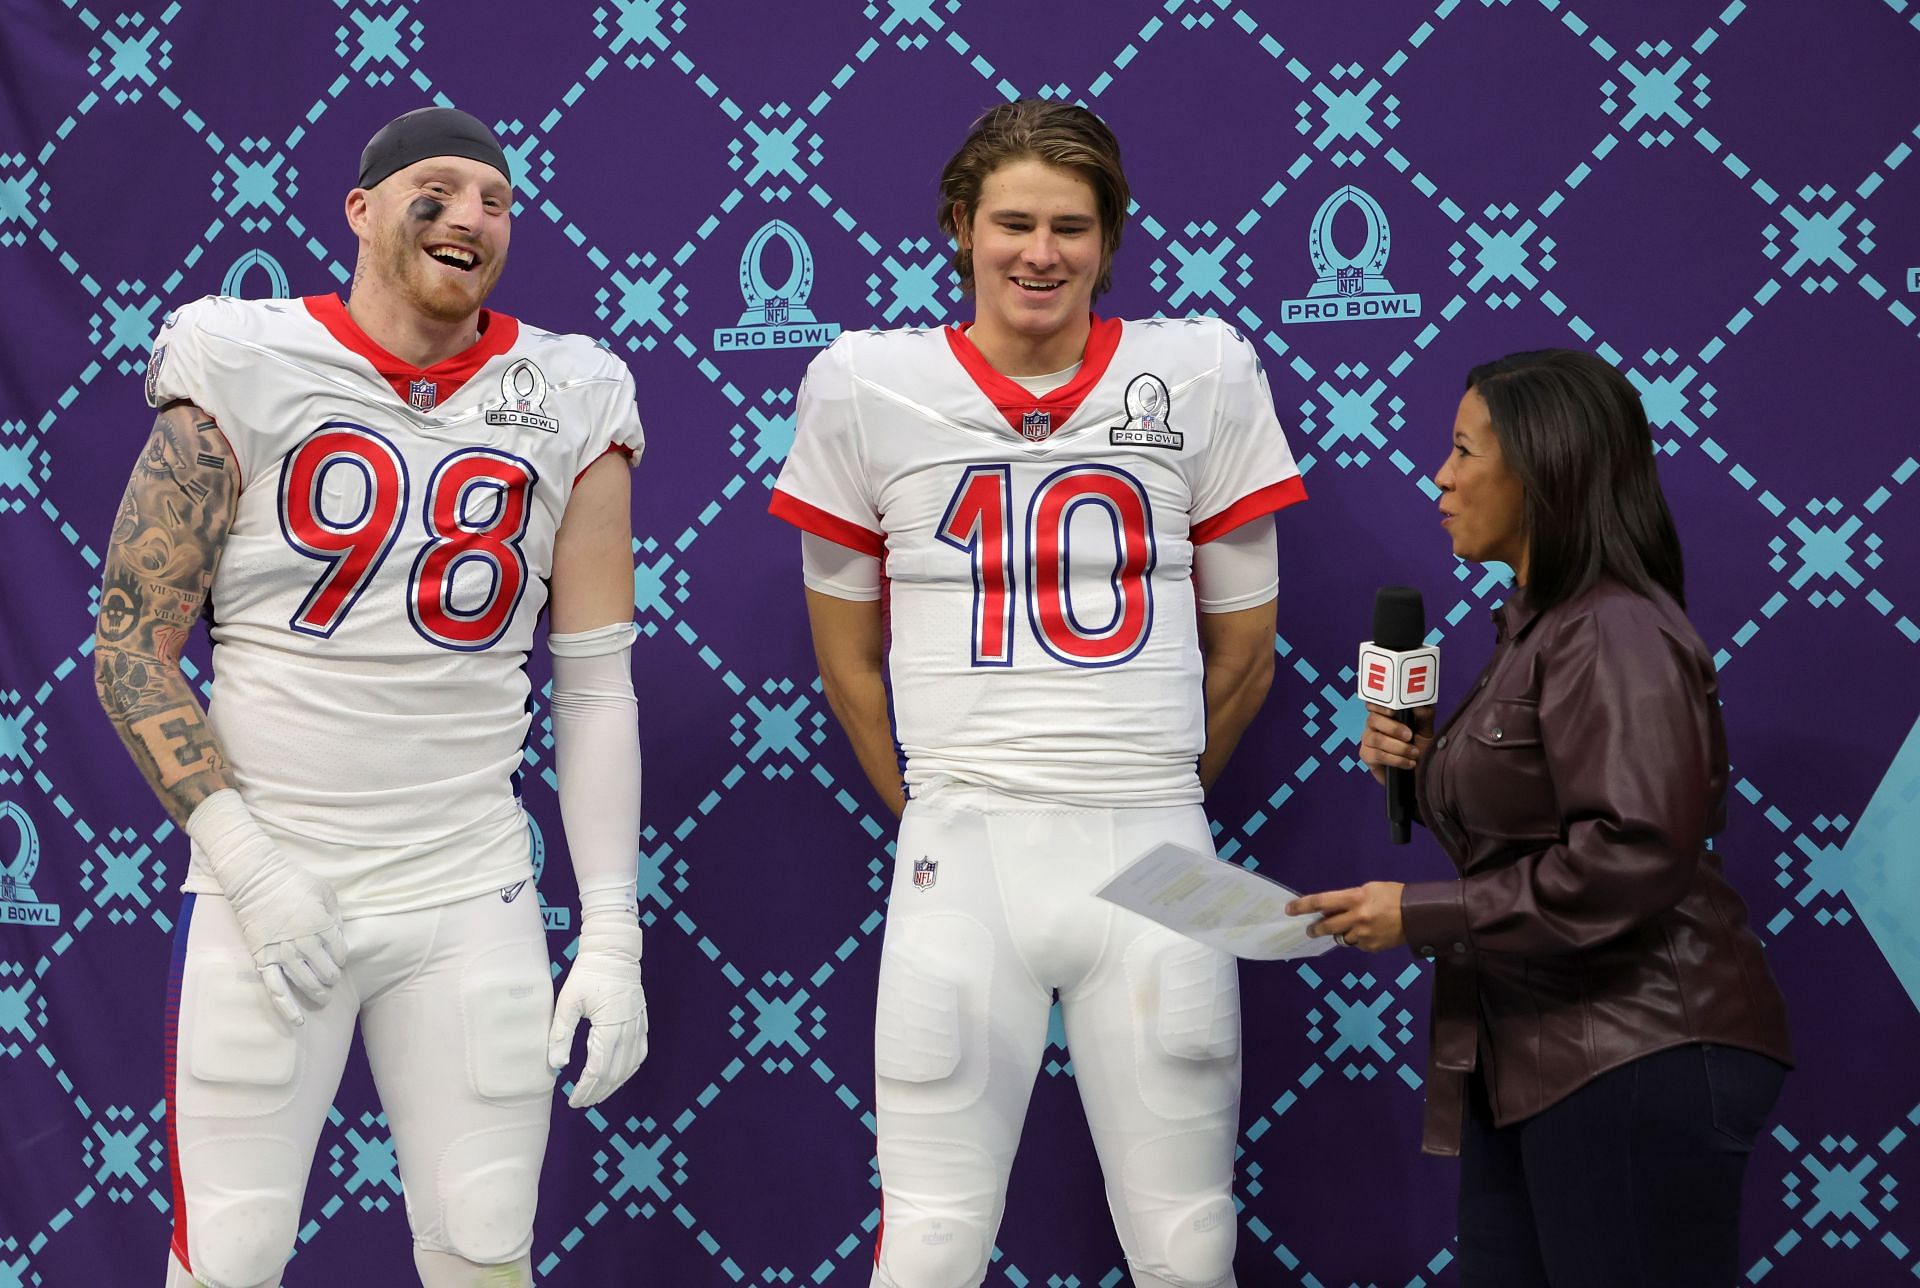 Pro Bowl lacks intensity, but NFL players have fun